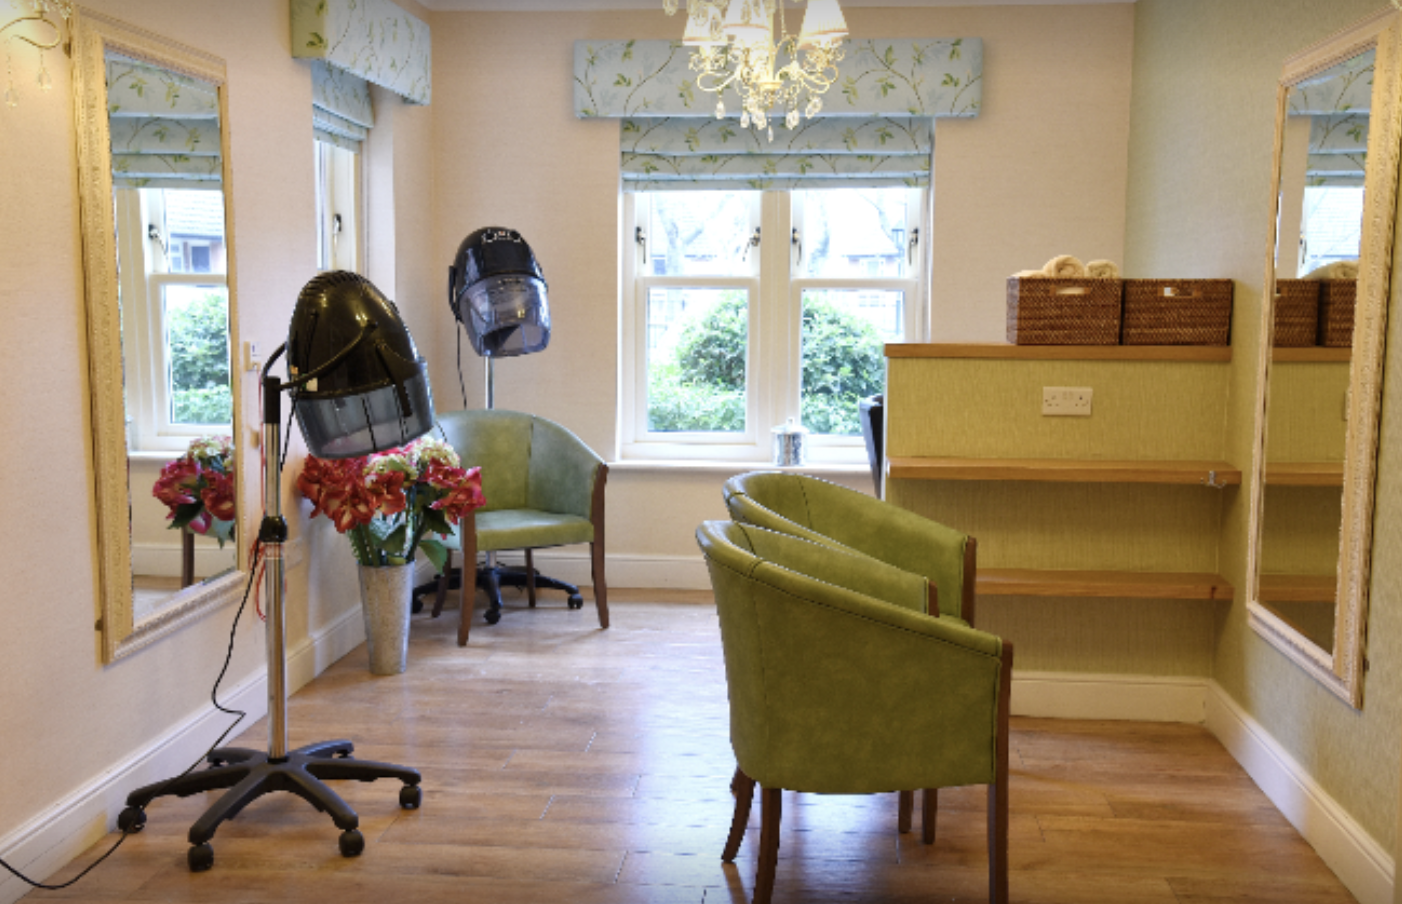 Salon at Sunnyview House Care Home in Leeds, West Yorkshire